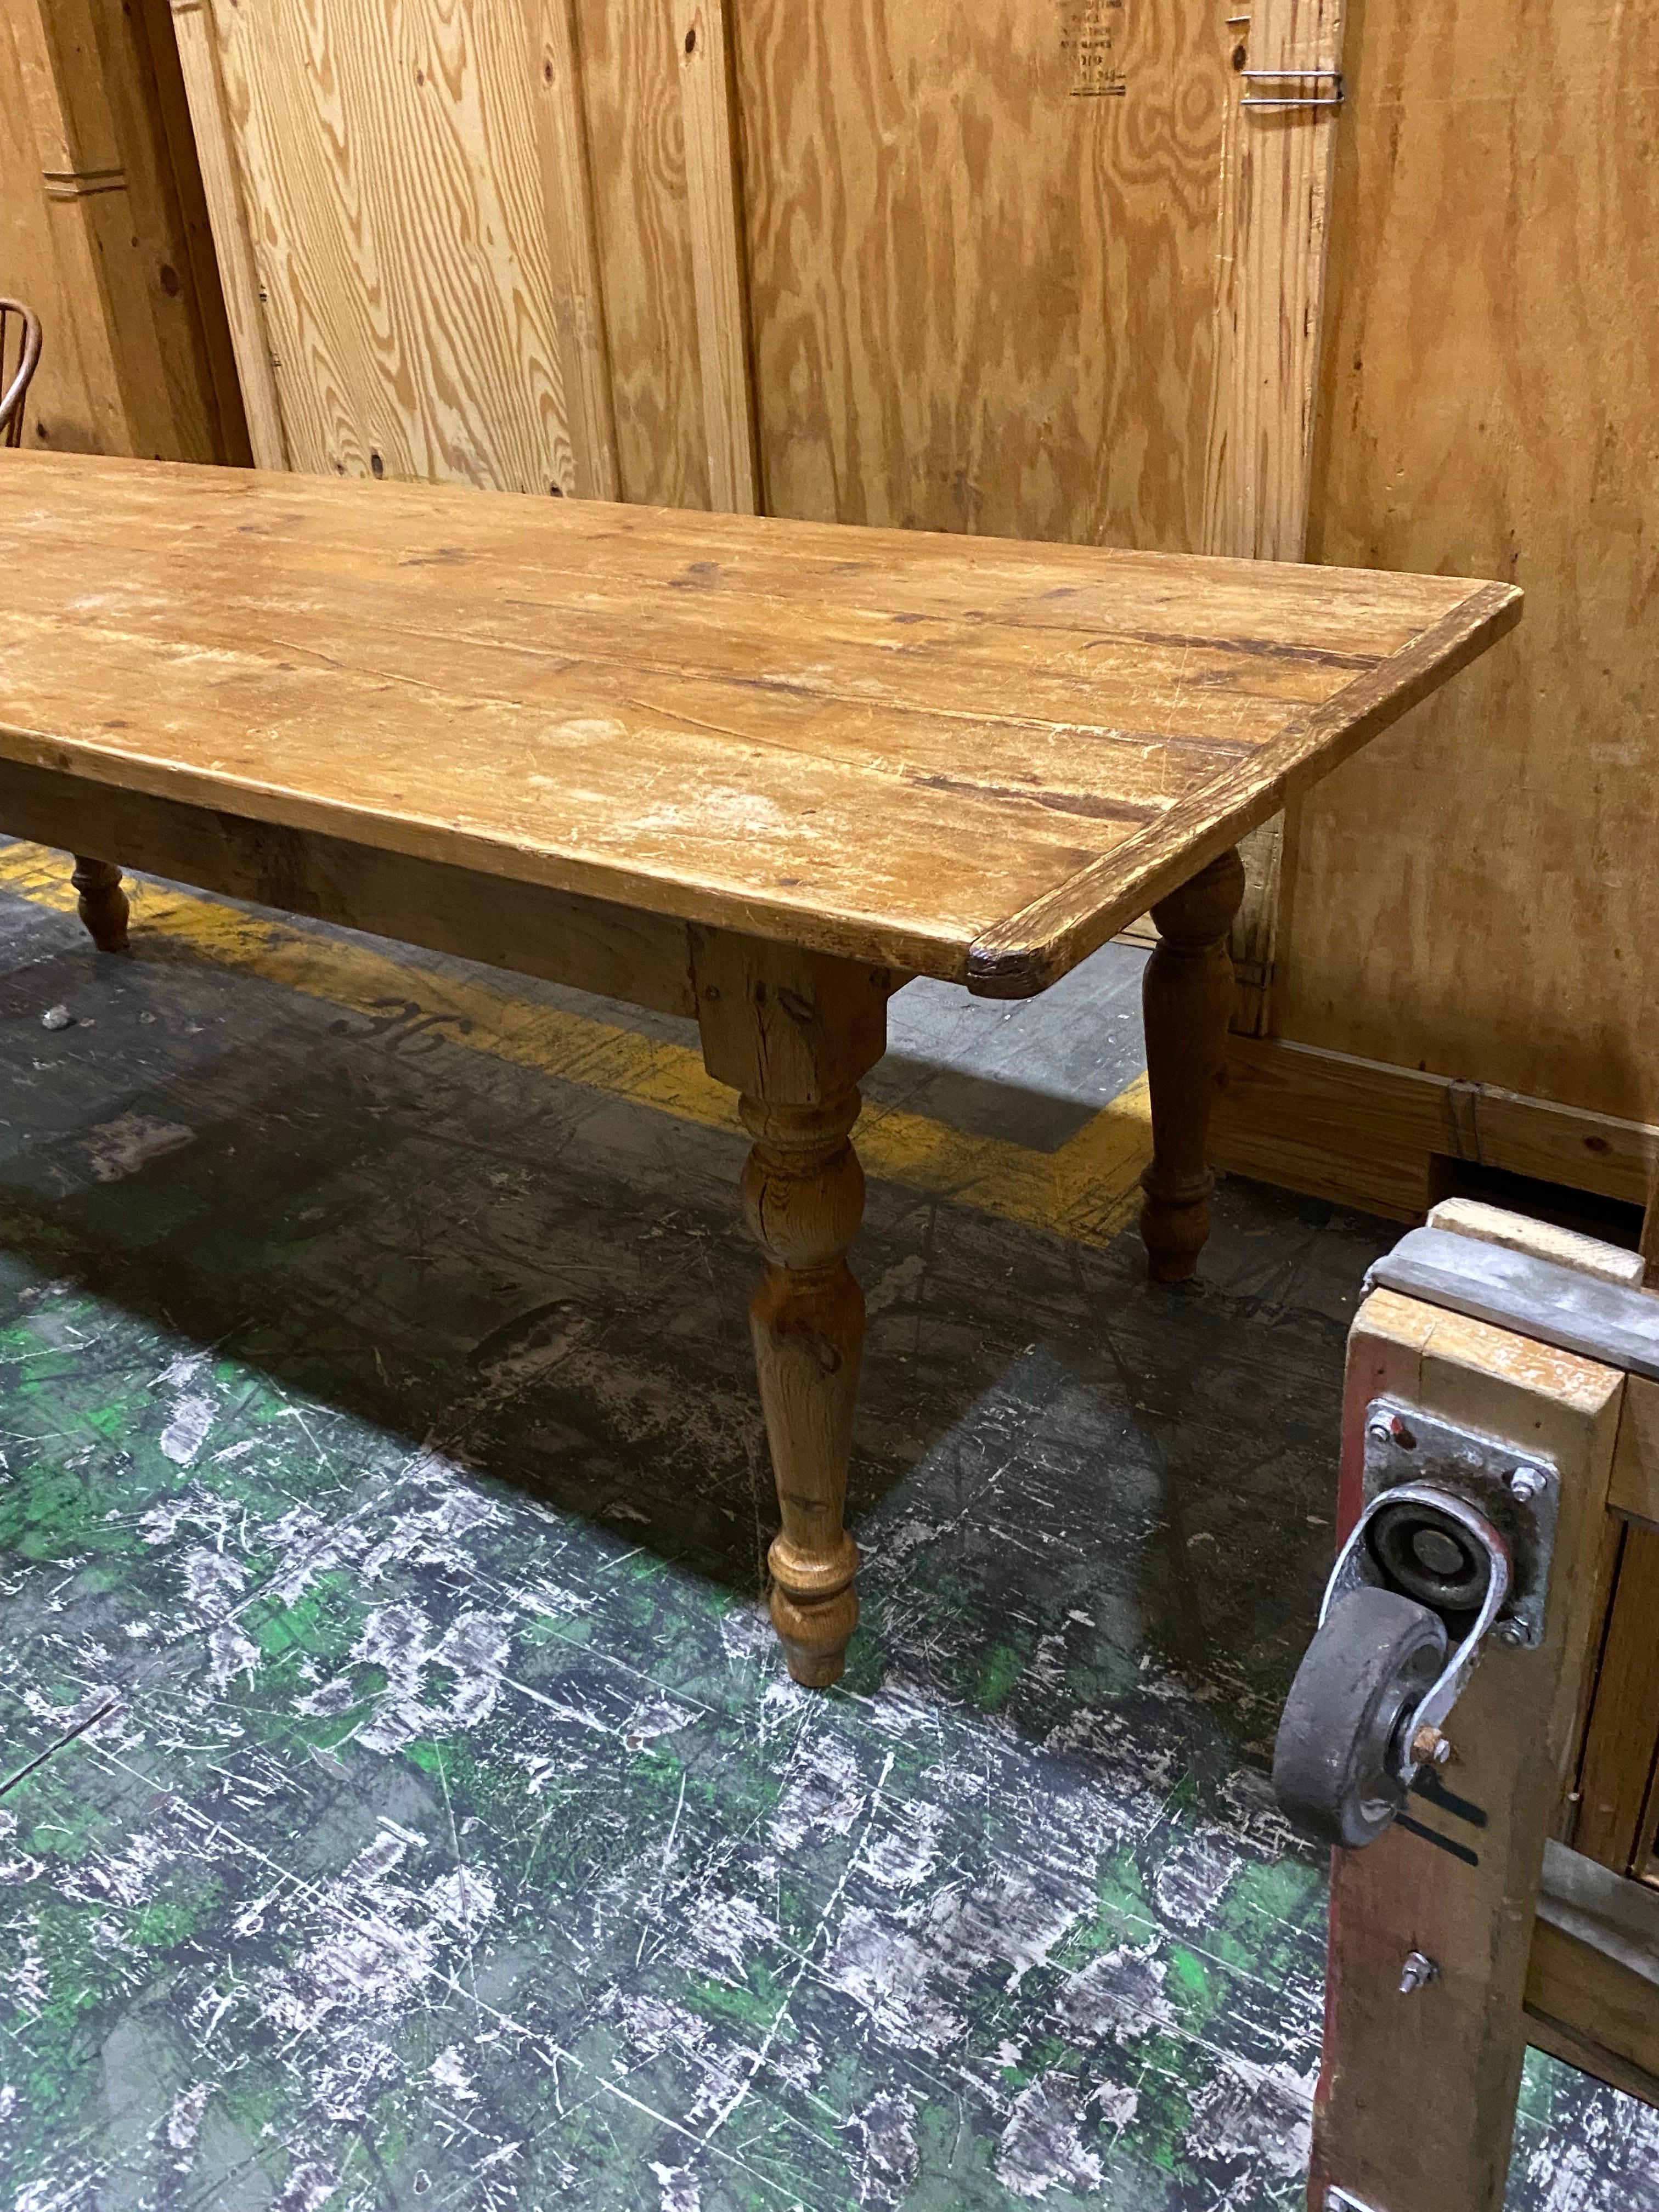 Long Rustic Pine dining table
Great patina and wear, extra long, with lovely turned legs. This is an excellent family dining table. Finish has wear to surface, scratches and scuffs. Structurally sound. 

Measures: 38